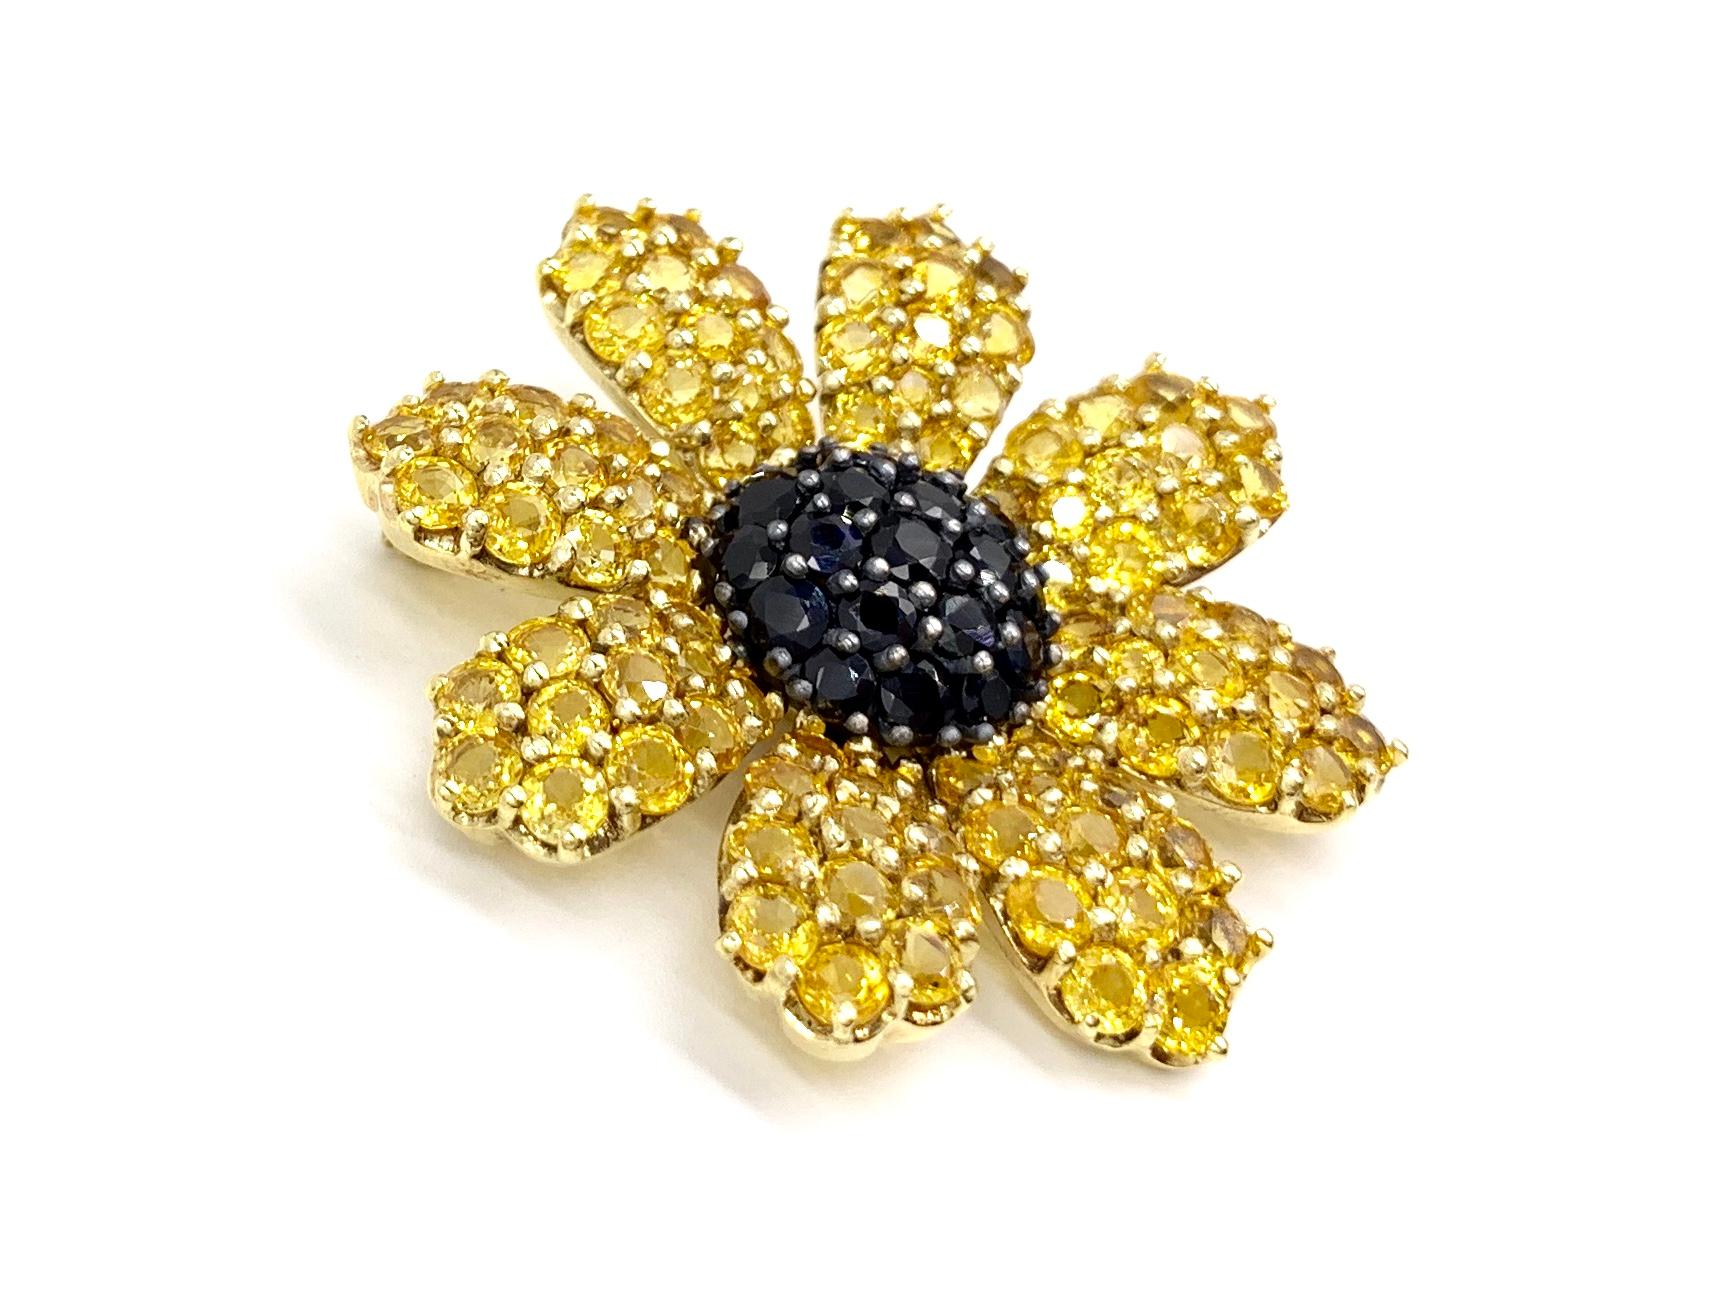 A stunning flower brooch expertly crafted by Jean Vitau. This 18 karat yellow gold Black-Eyed Susan flower brooch features 13.38 carats of striking yellow sapphires on the petals and 4 carats of rich ebony sapphires in the center. Stones are